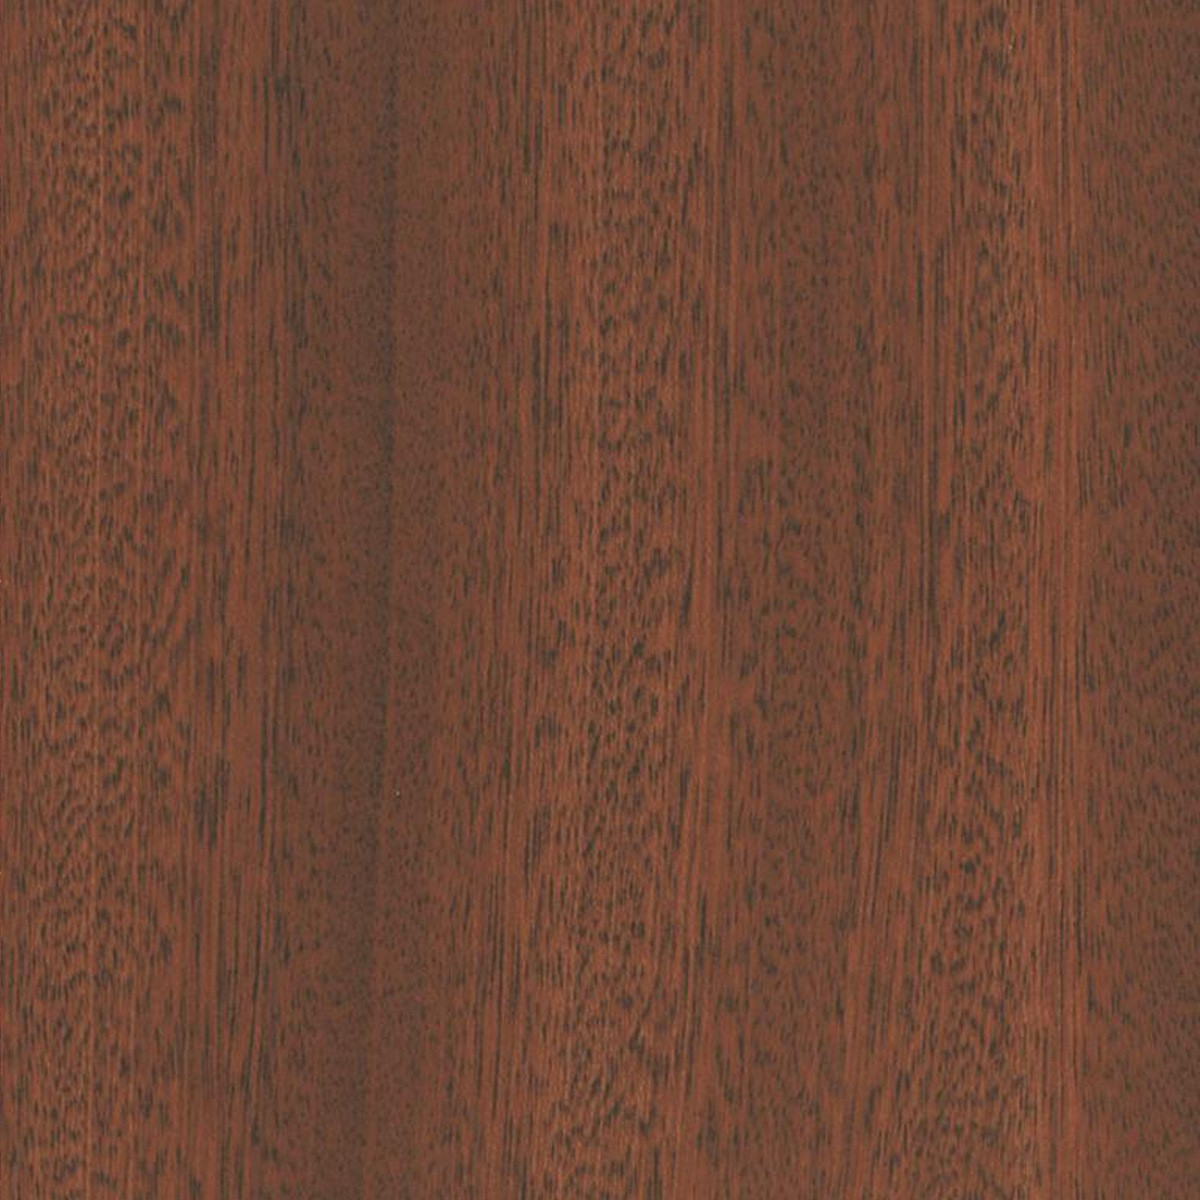 13 Wonderful wholesale Hardwood Flooring St Louis 2024 free download wholesale hardwood flooring st louis of flooring design ideas find ideas and inspiration for flooring regarding 35 awesome click flooring collection